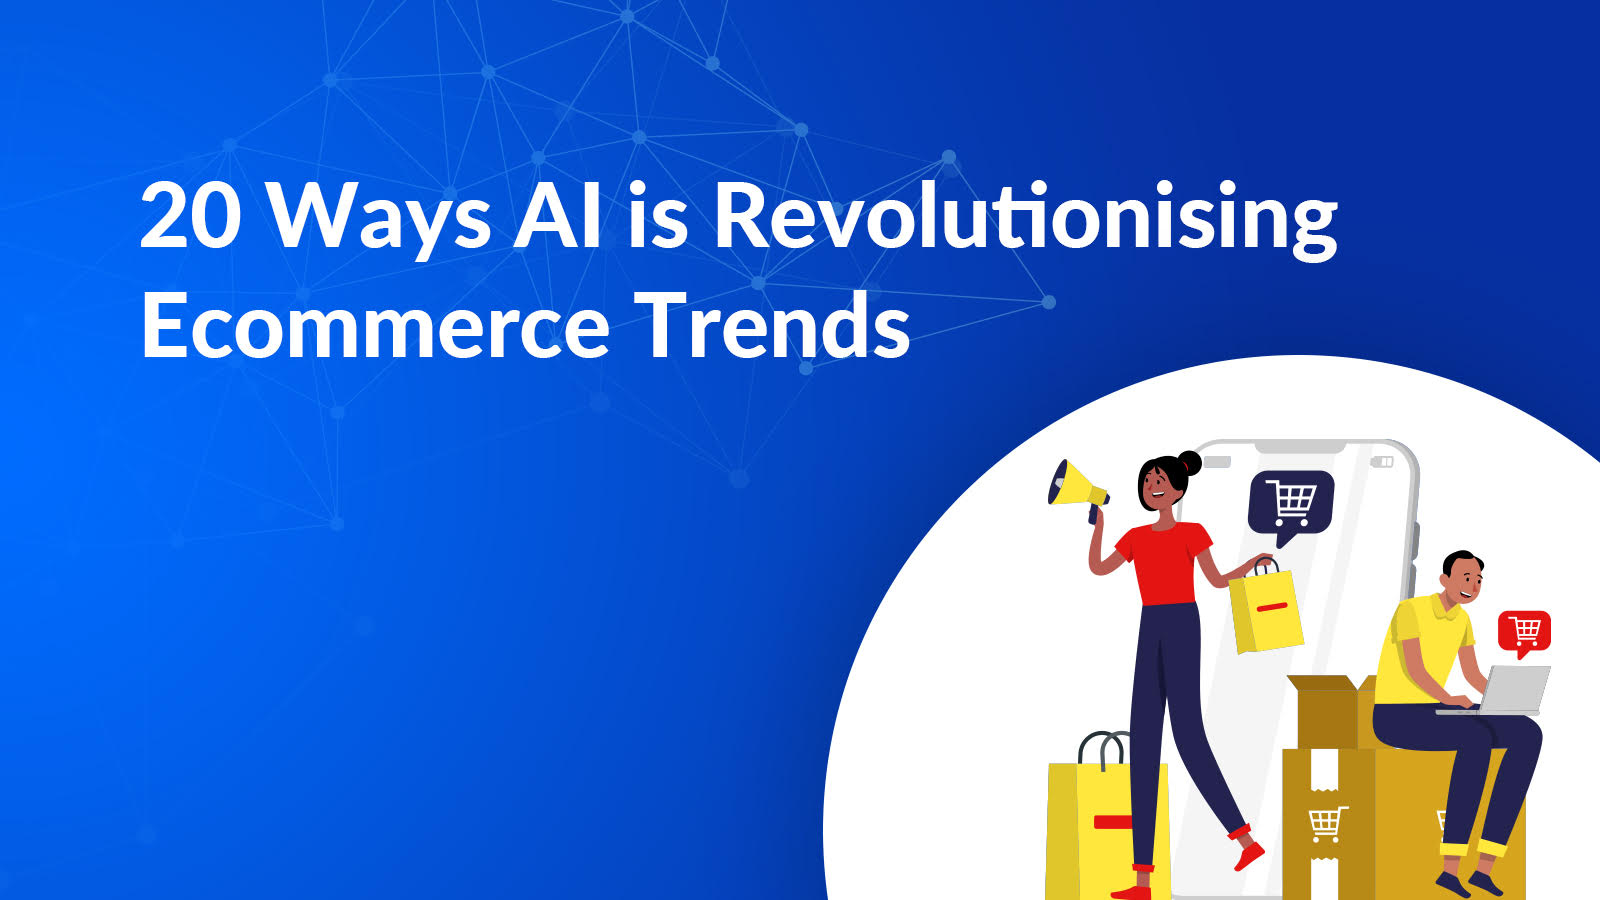 AI is Revolutionizing Ecommerce Trends